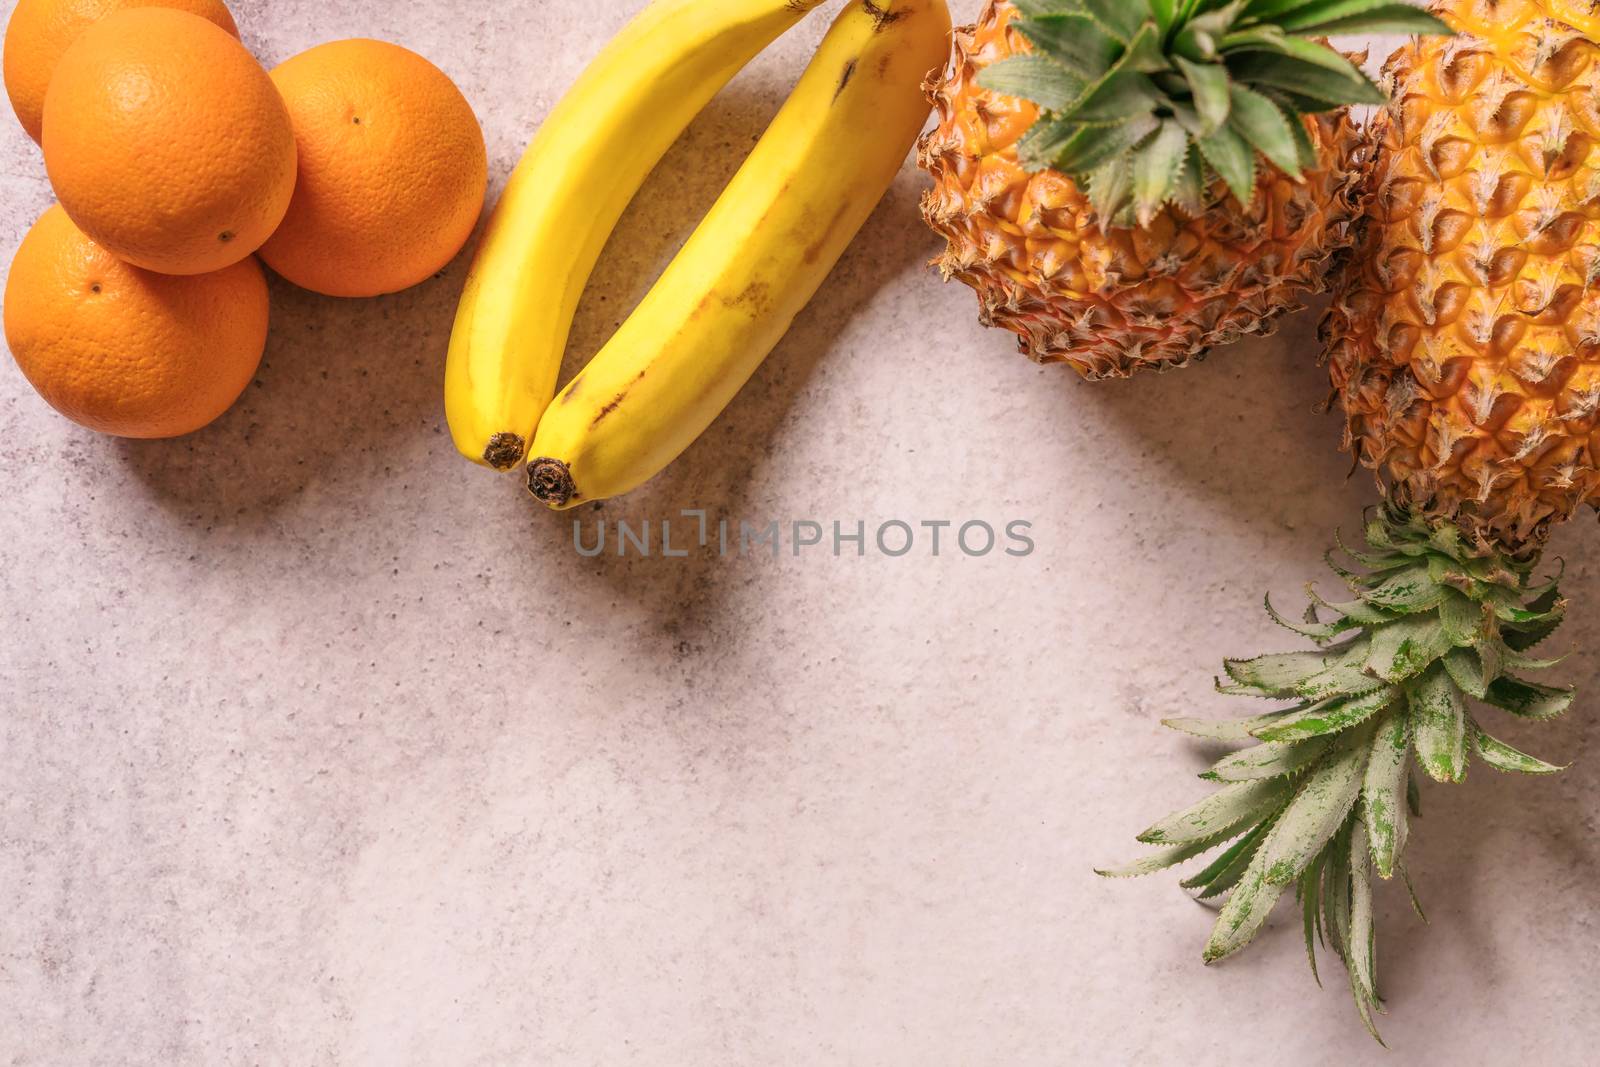 Tropical and Seasonal Summer Fruits. Pineapple Oranges and Banan by psodaz